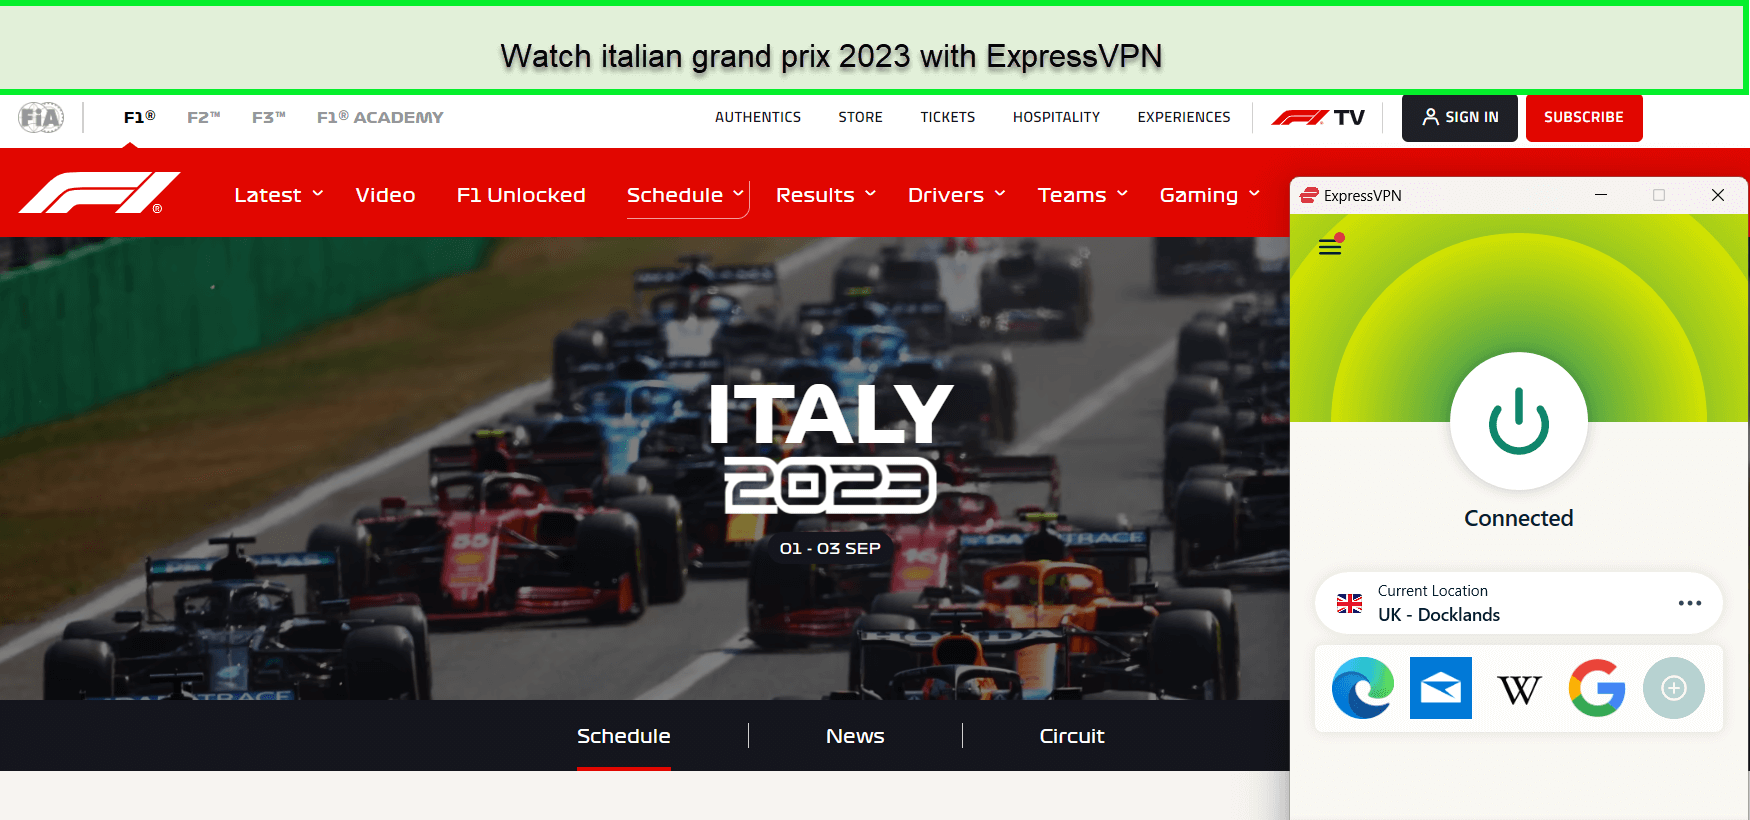 How-to-Watch-Italian-Grand-Prix-2023-in-Singapore-on-ITV-with-ExpressVPN